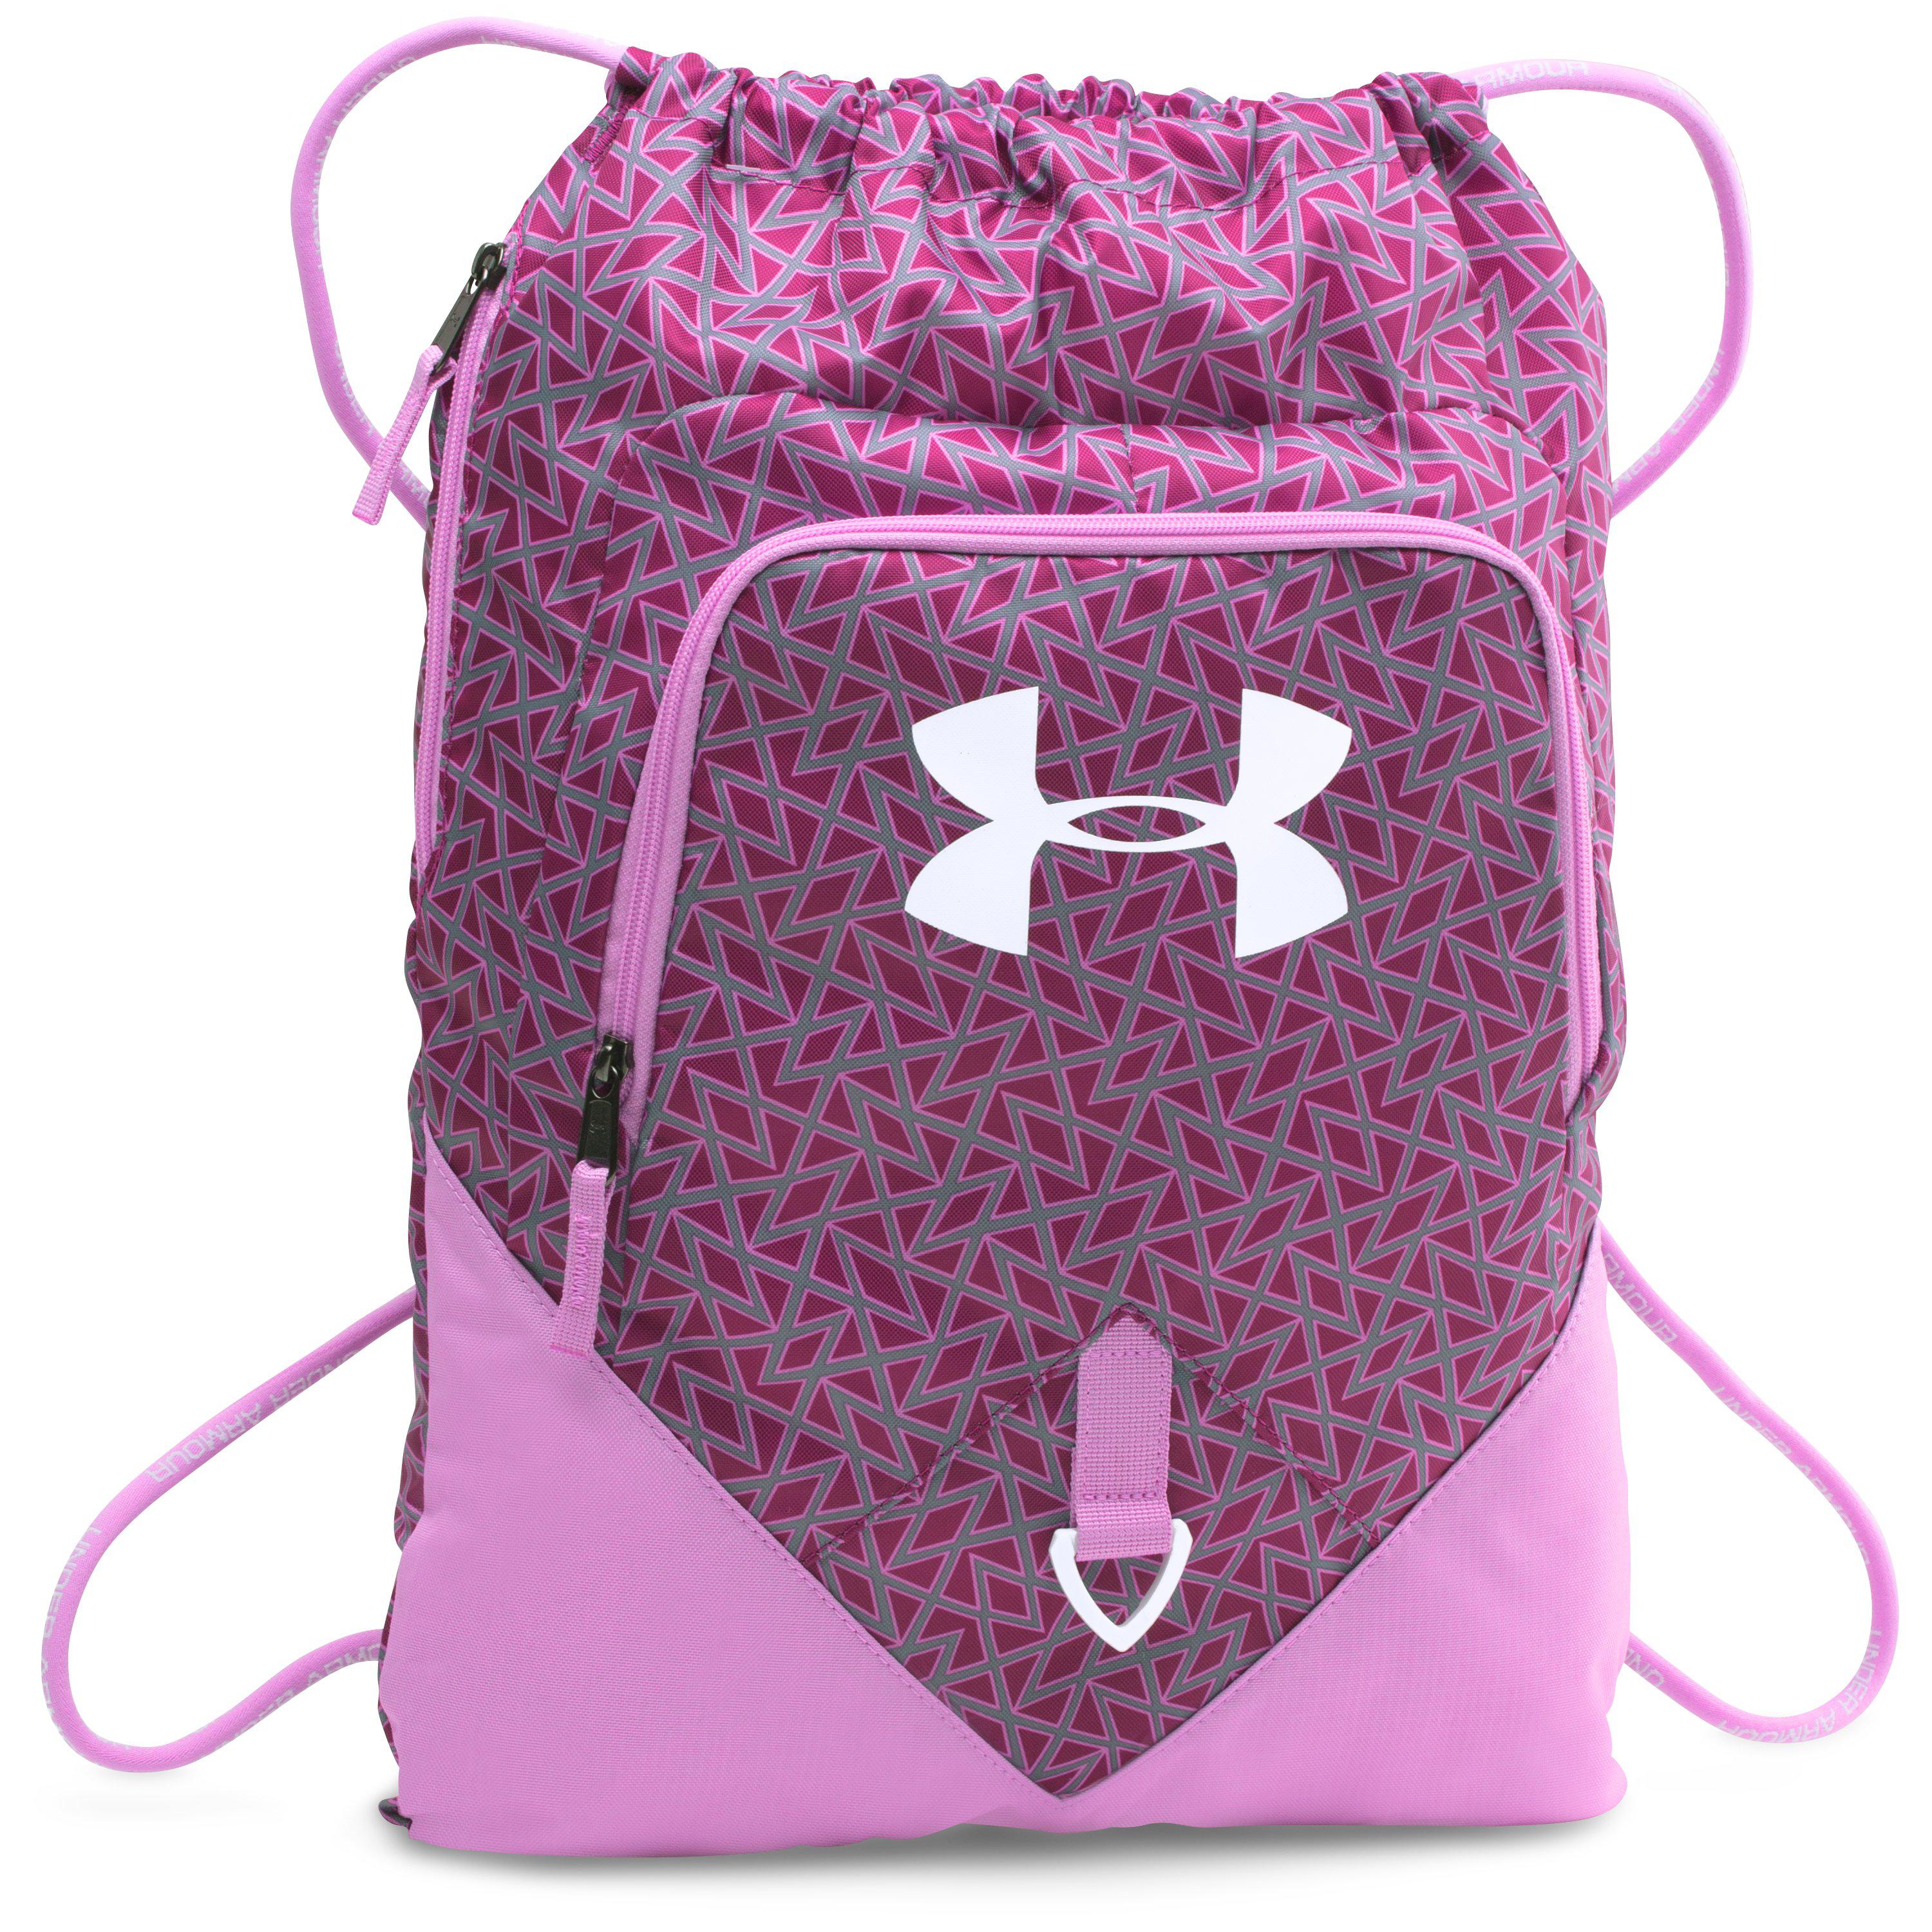 Under Armour Synthetic Ua Undeniable Sackpack in Purple - Lyst